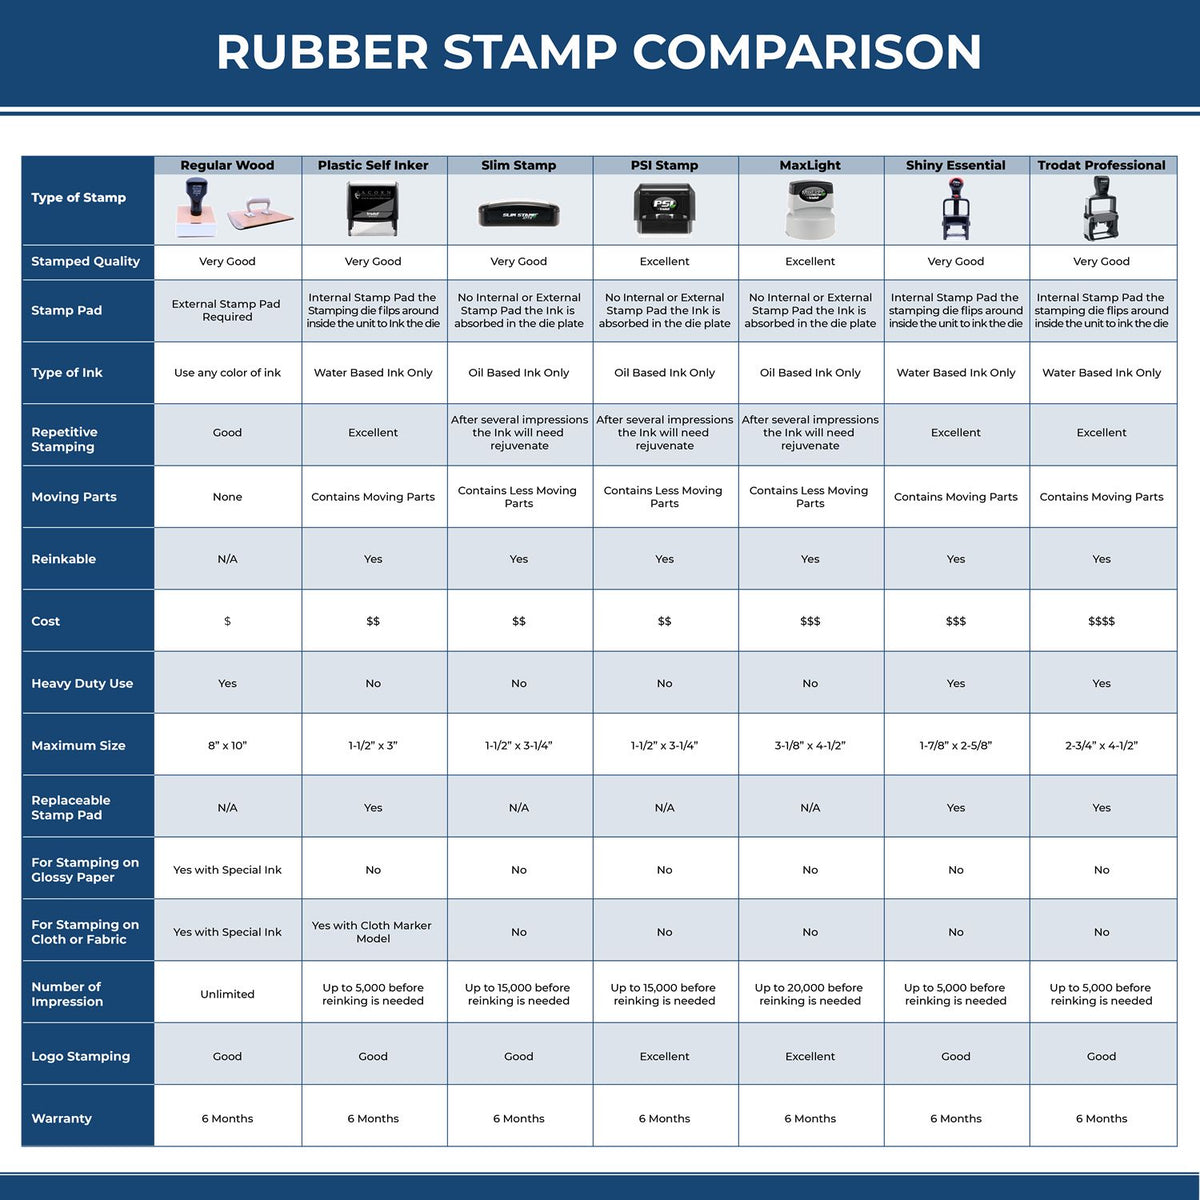 Rejected Rubber Stamp 4050R Rubber Stamp Comparison